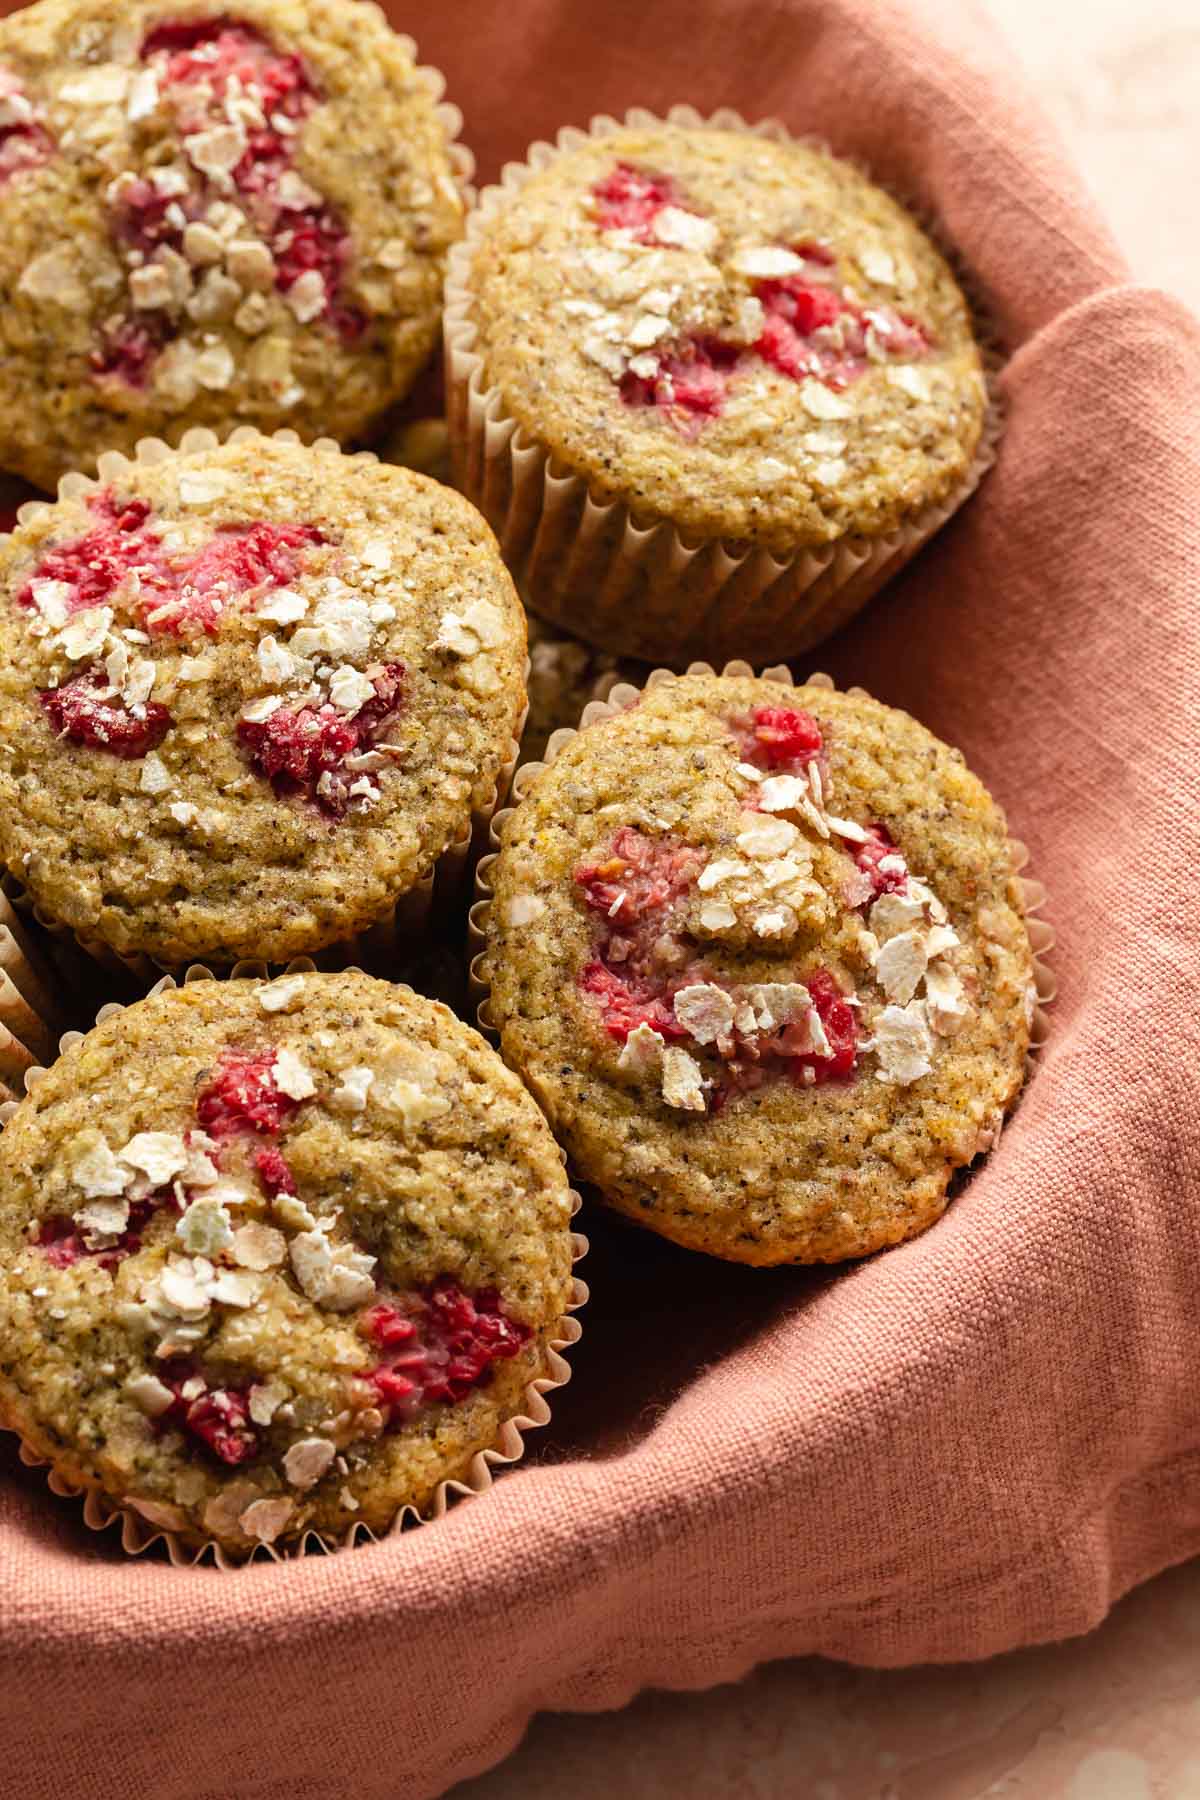 Up close view of raspberry buckwheat muffins in a basket.